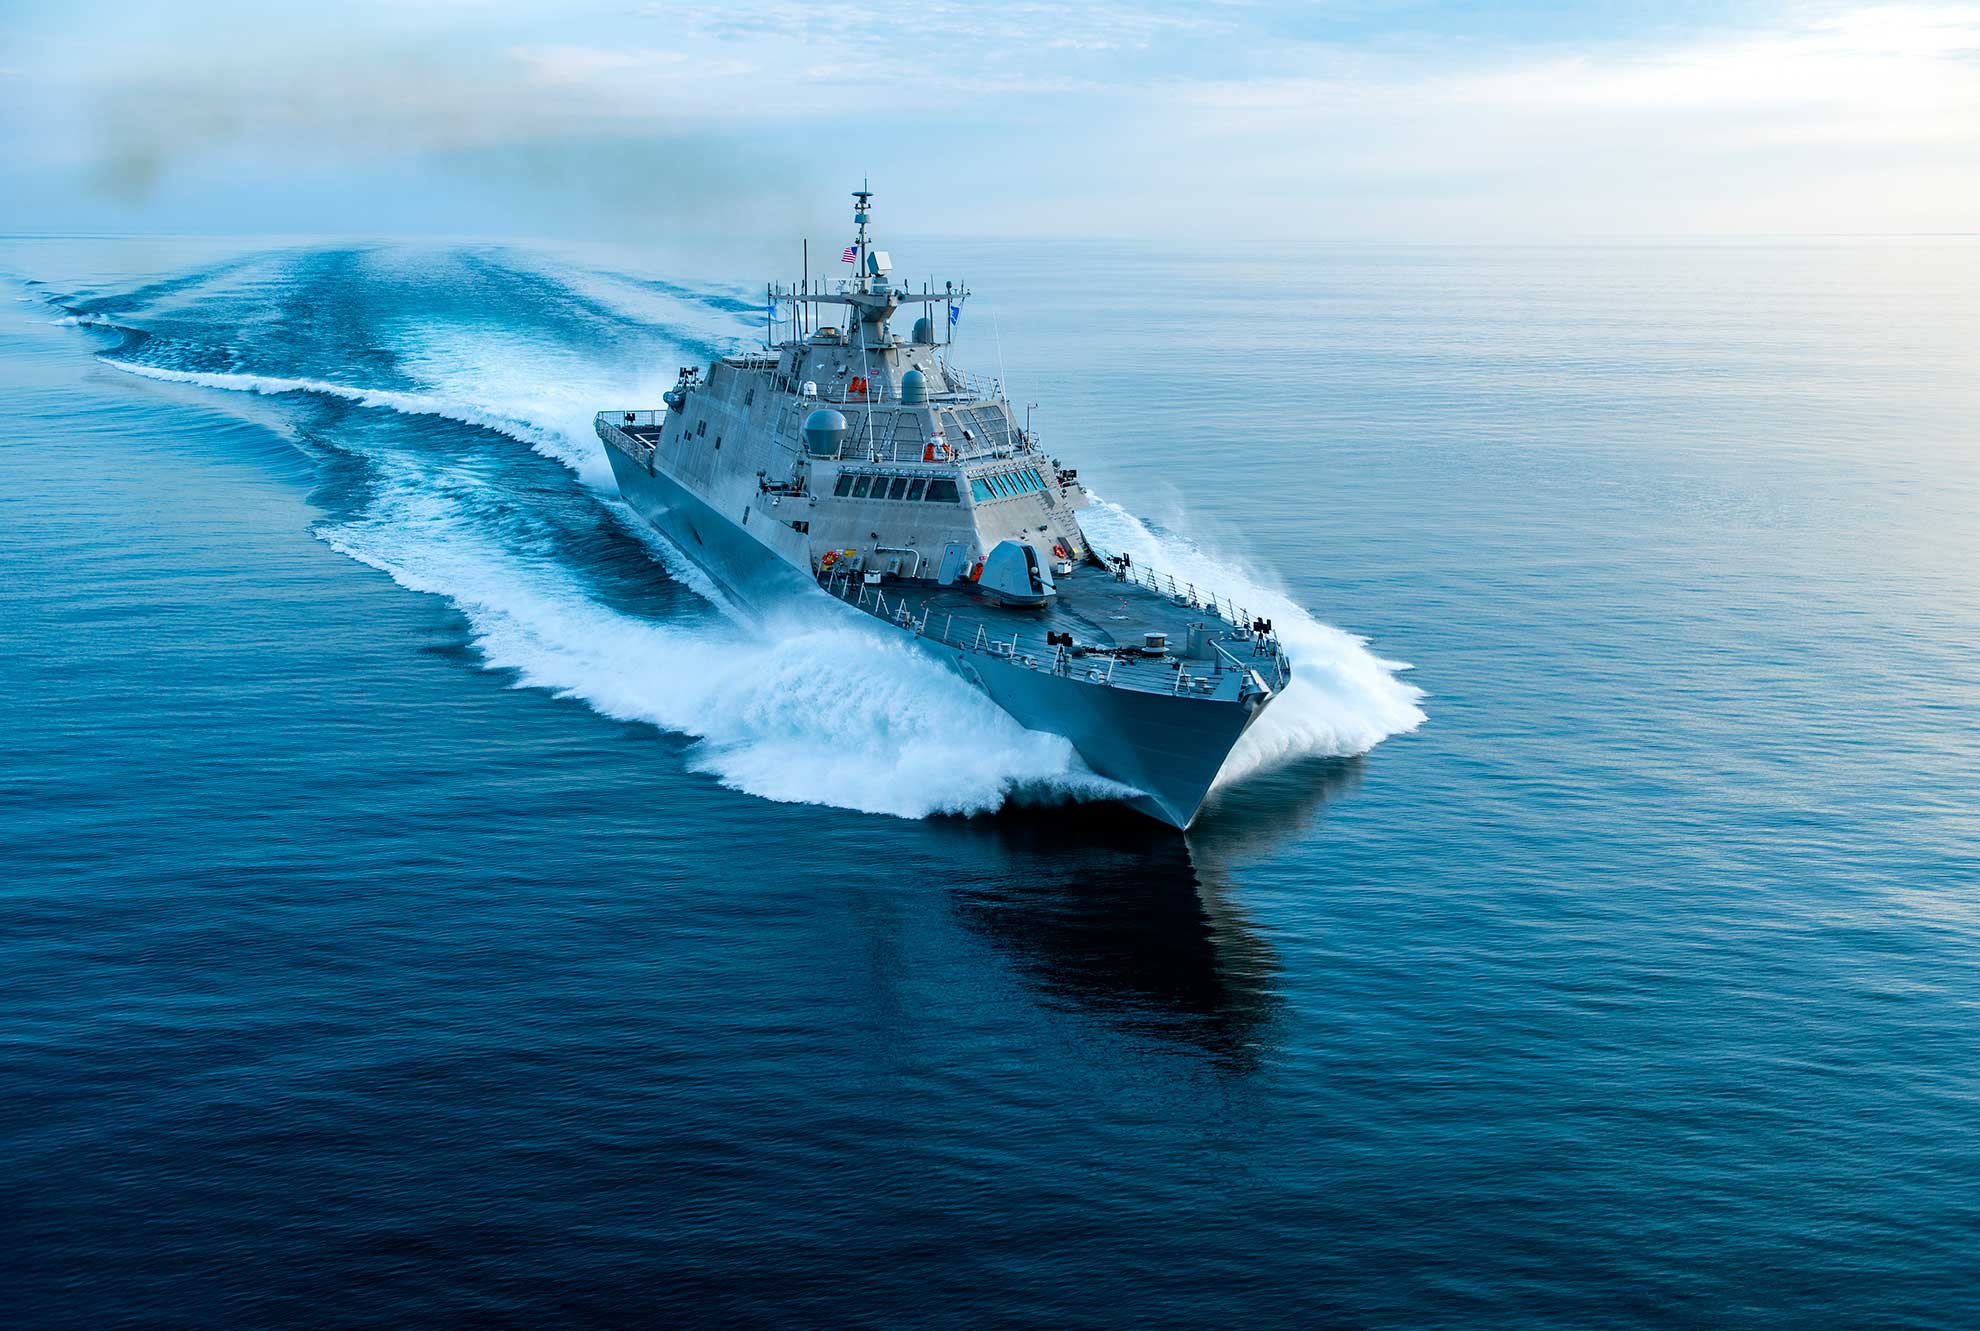 Lake Michigan (July 11, 2018) The future littoral combat ship USS Wichita (LCS 13) conducts acceptance trials, which are the last significant milestone before a ship is delivered to the Navy. LCS-13 is a fast, agile, focused-mission platform designed for operation in near-shore environments as well as the open-ocean. It is designed to defeat asymmetric threats such as mines, quiet diesel submarines and fast surface craft -- U.S. Navy photo courtesy of Lockheed Martin. -